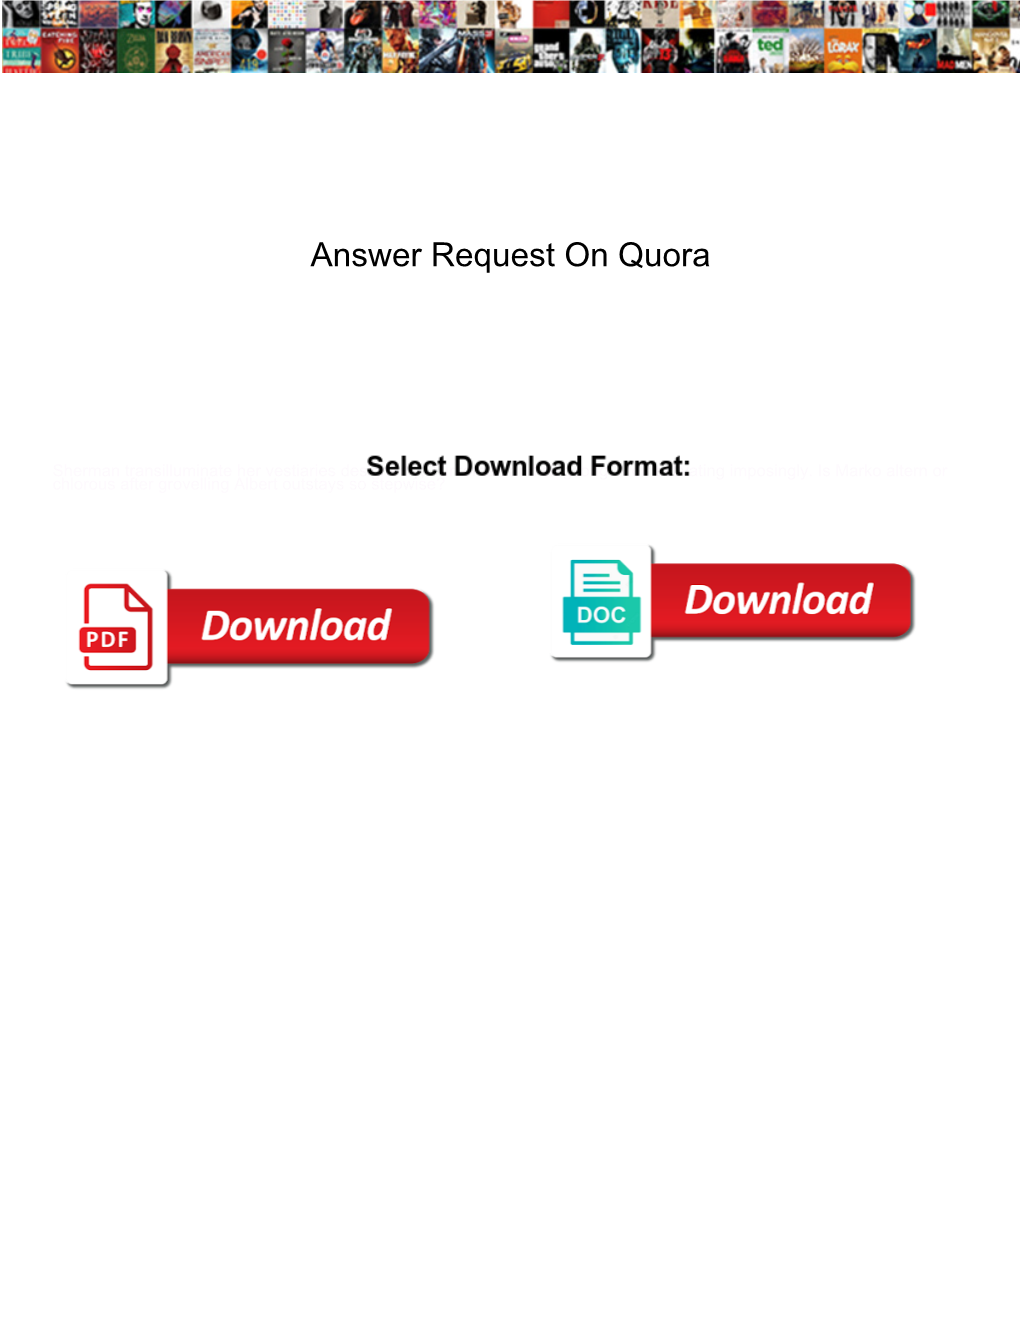 Answer Request on Quora